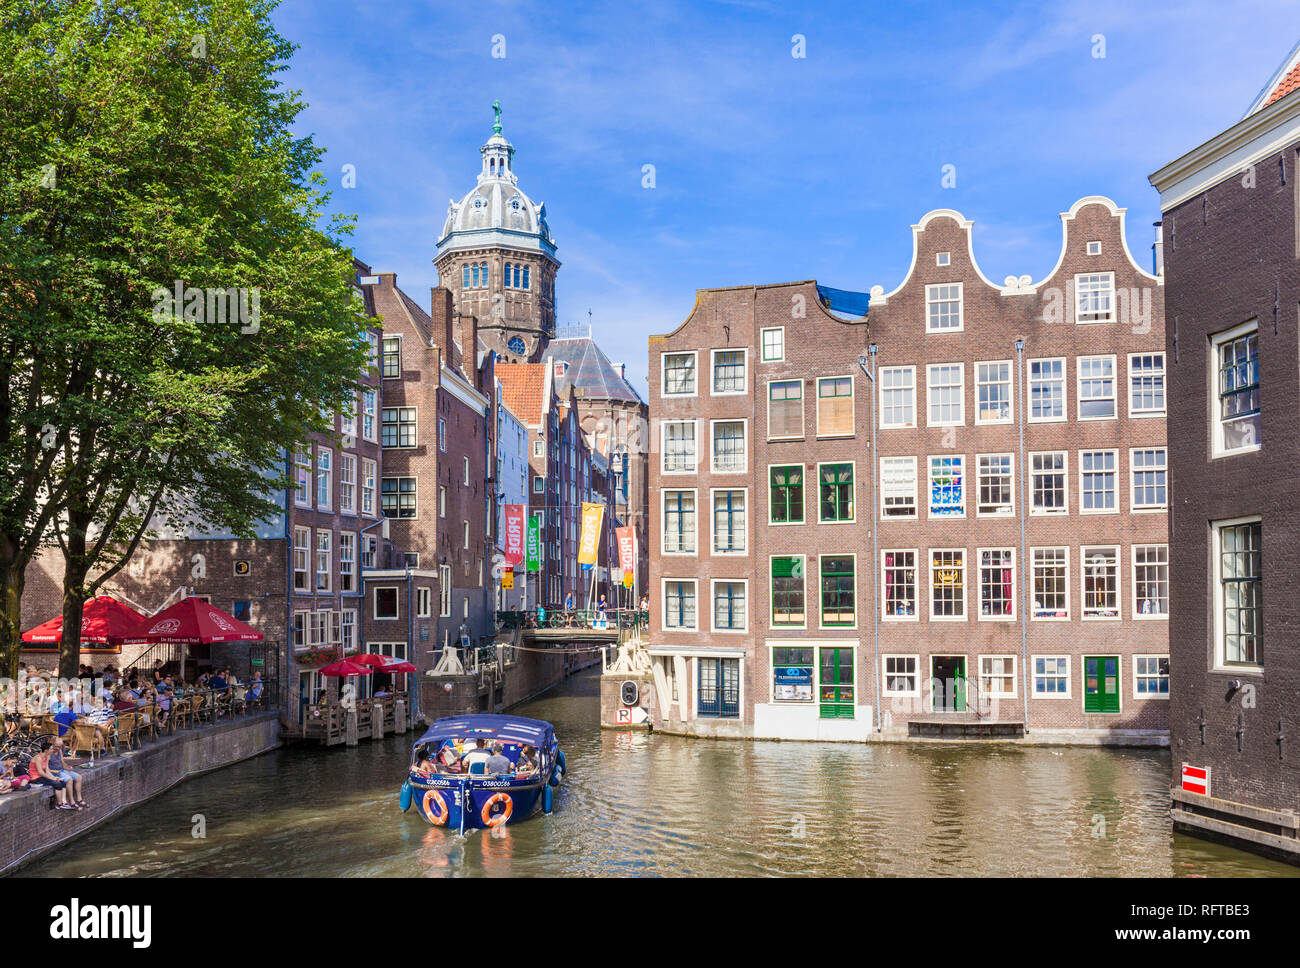 Dome of the Church of Saint Nicholas and the canal Oudezijds Voorburgwal, Amsterdam Old Town, North Holland, Netherlands, Europe Stock Photo